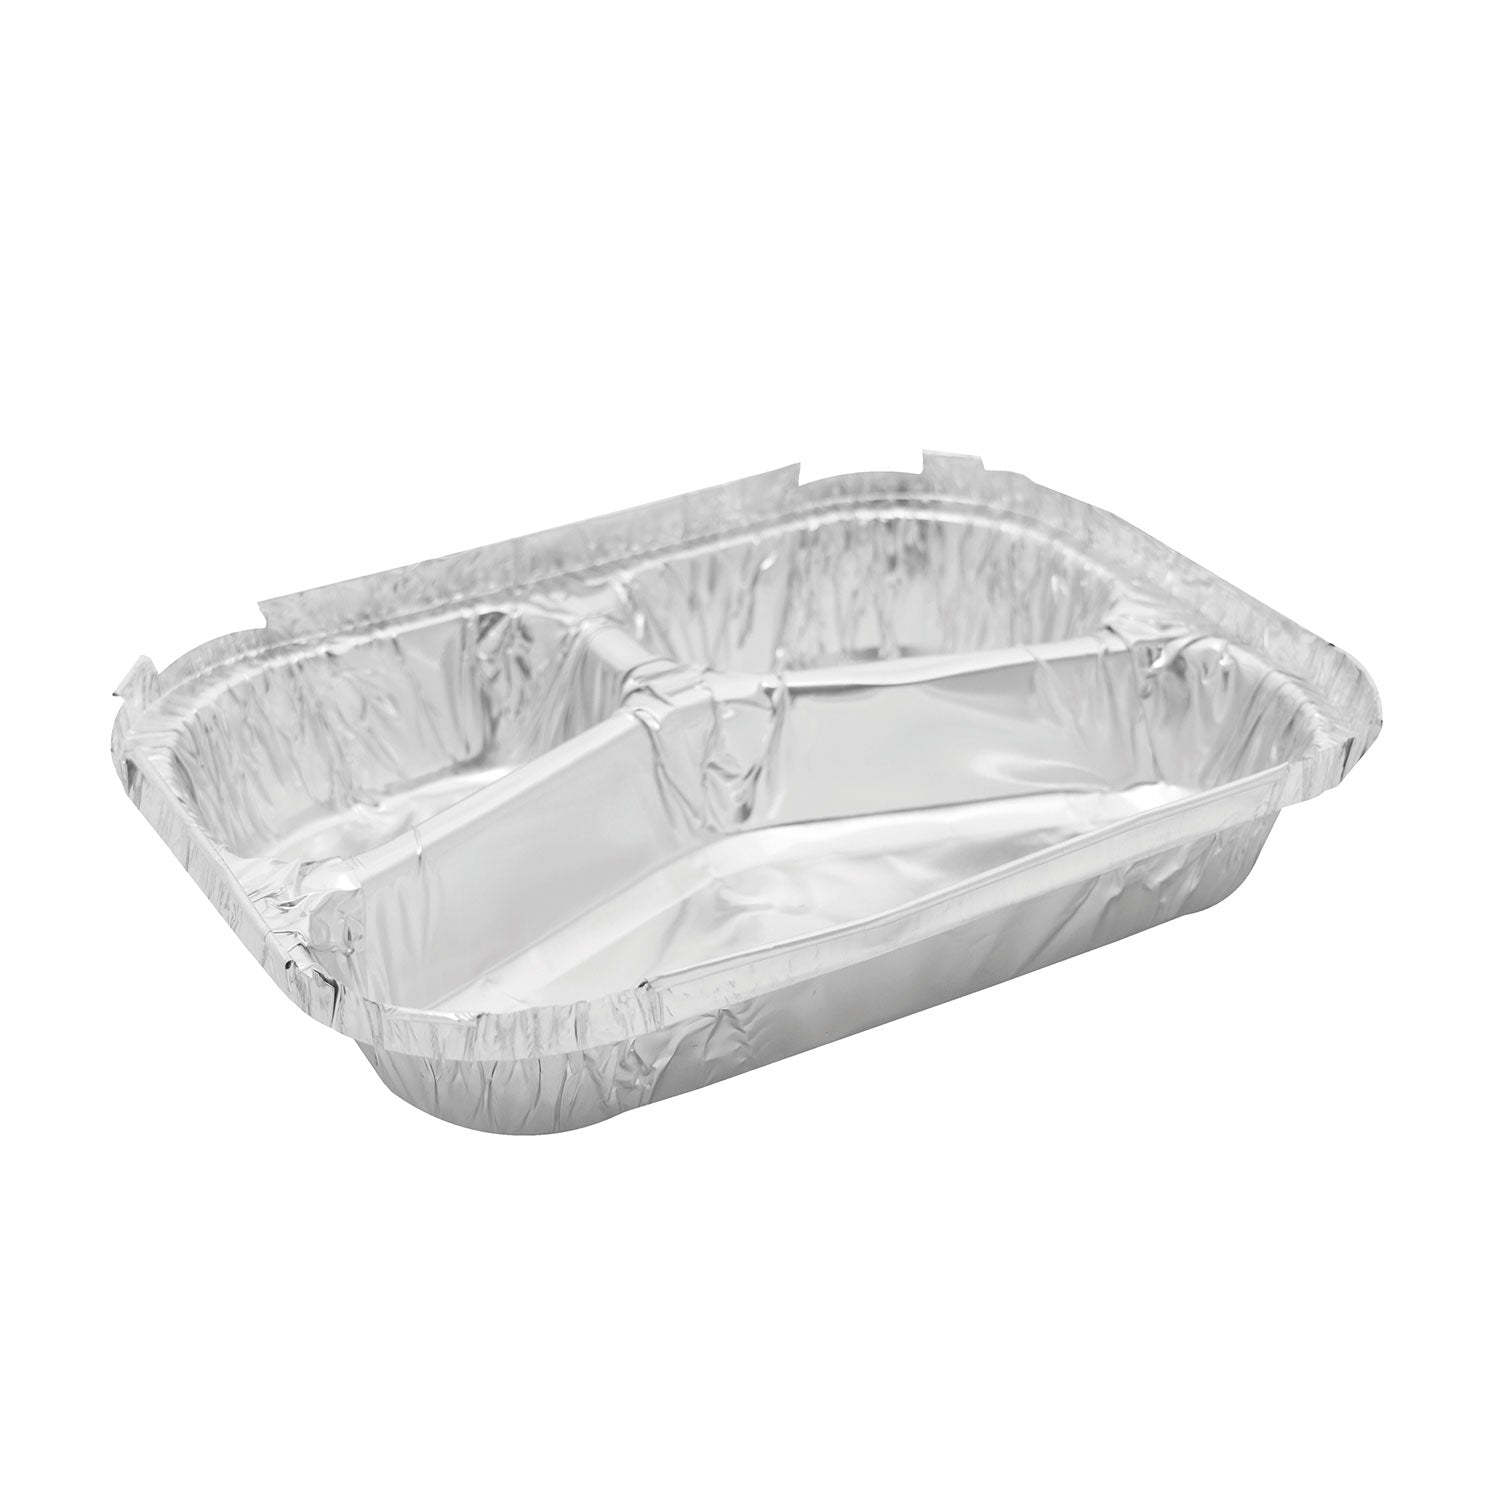 Katermaster Katermaster Tray Meal 3 compartment Foil - CT/500 Dining & Takeaway  